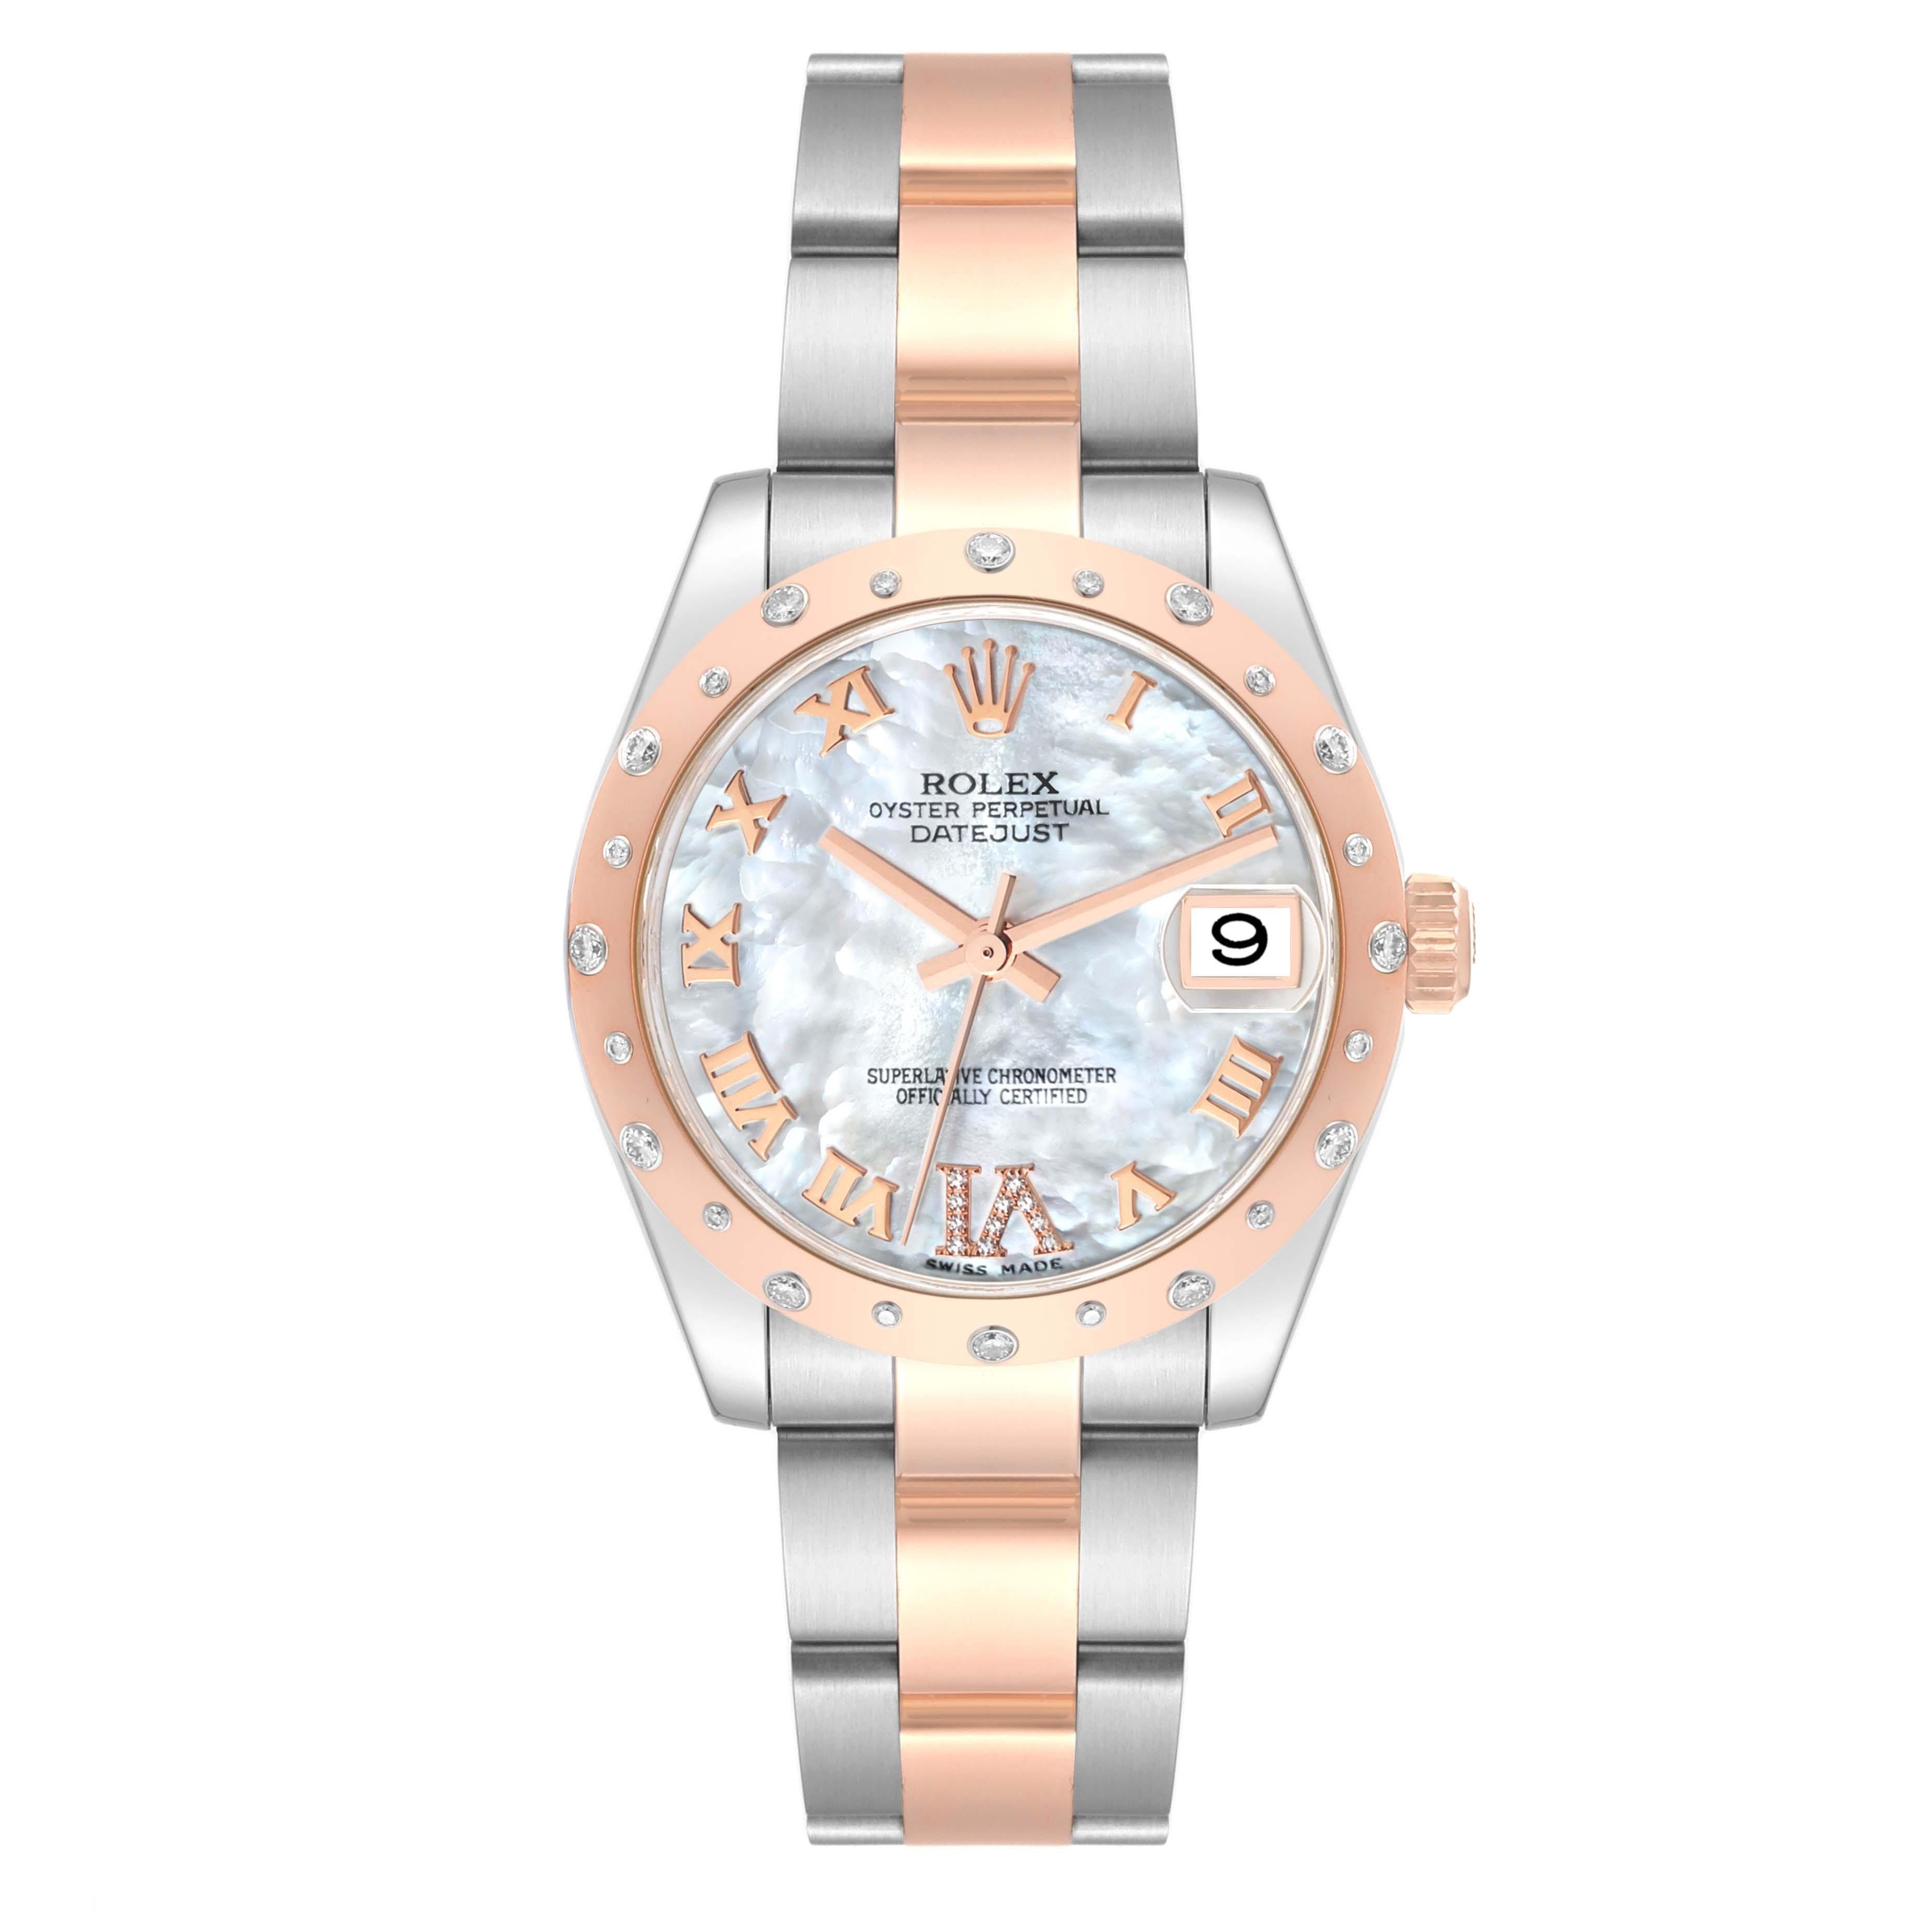 Rolex Datejust 31 Midsize Steel Rose Gold Mother Of Pearl Diamond Ladies Watch 178341. Officially certified chronometer self-winding movement. Stainless steel and 18K rose gold oyster case 31 mm in diameter. Rolex logo on a crown. 18K rose gold